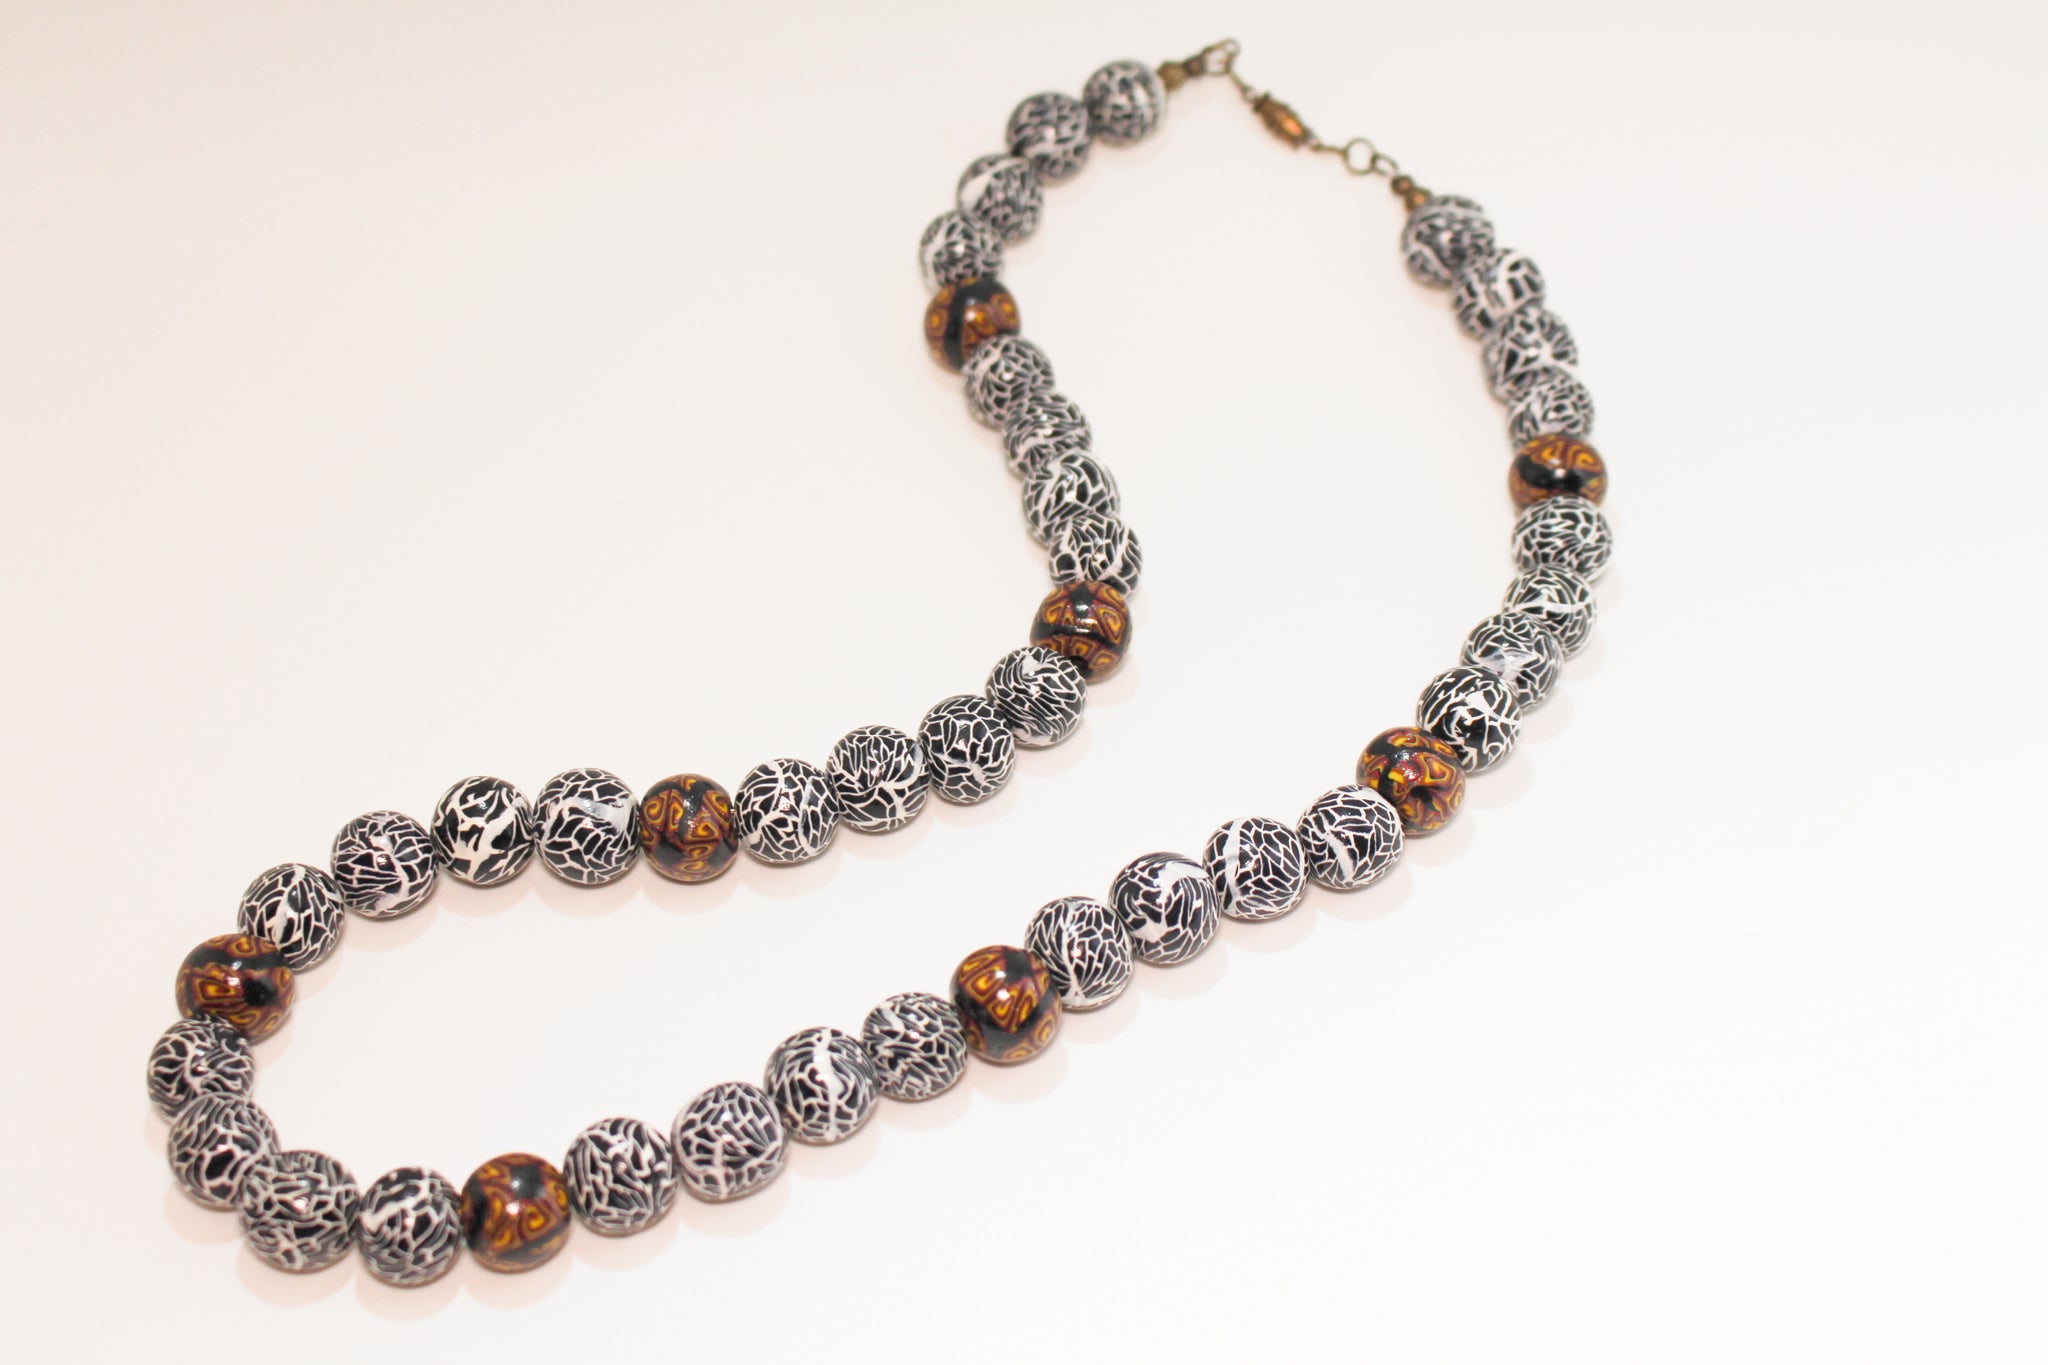 KD-SS007 The "Geode" Hand-Rolled 24 Inch, Gender-Neutral Necklace